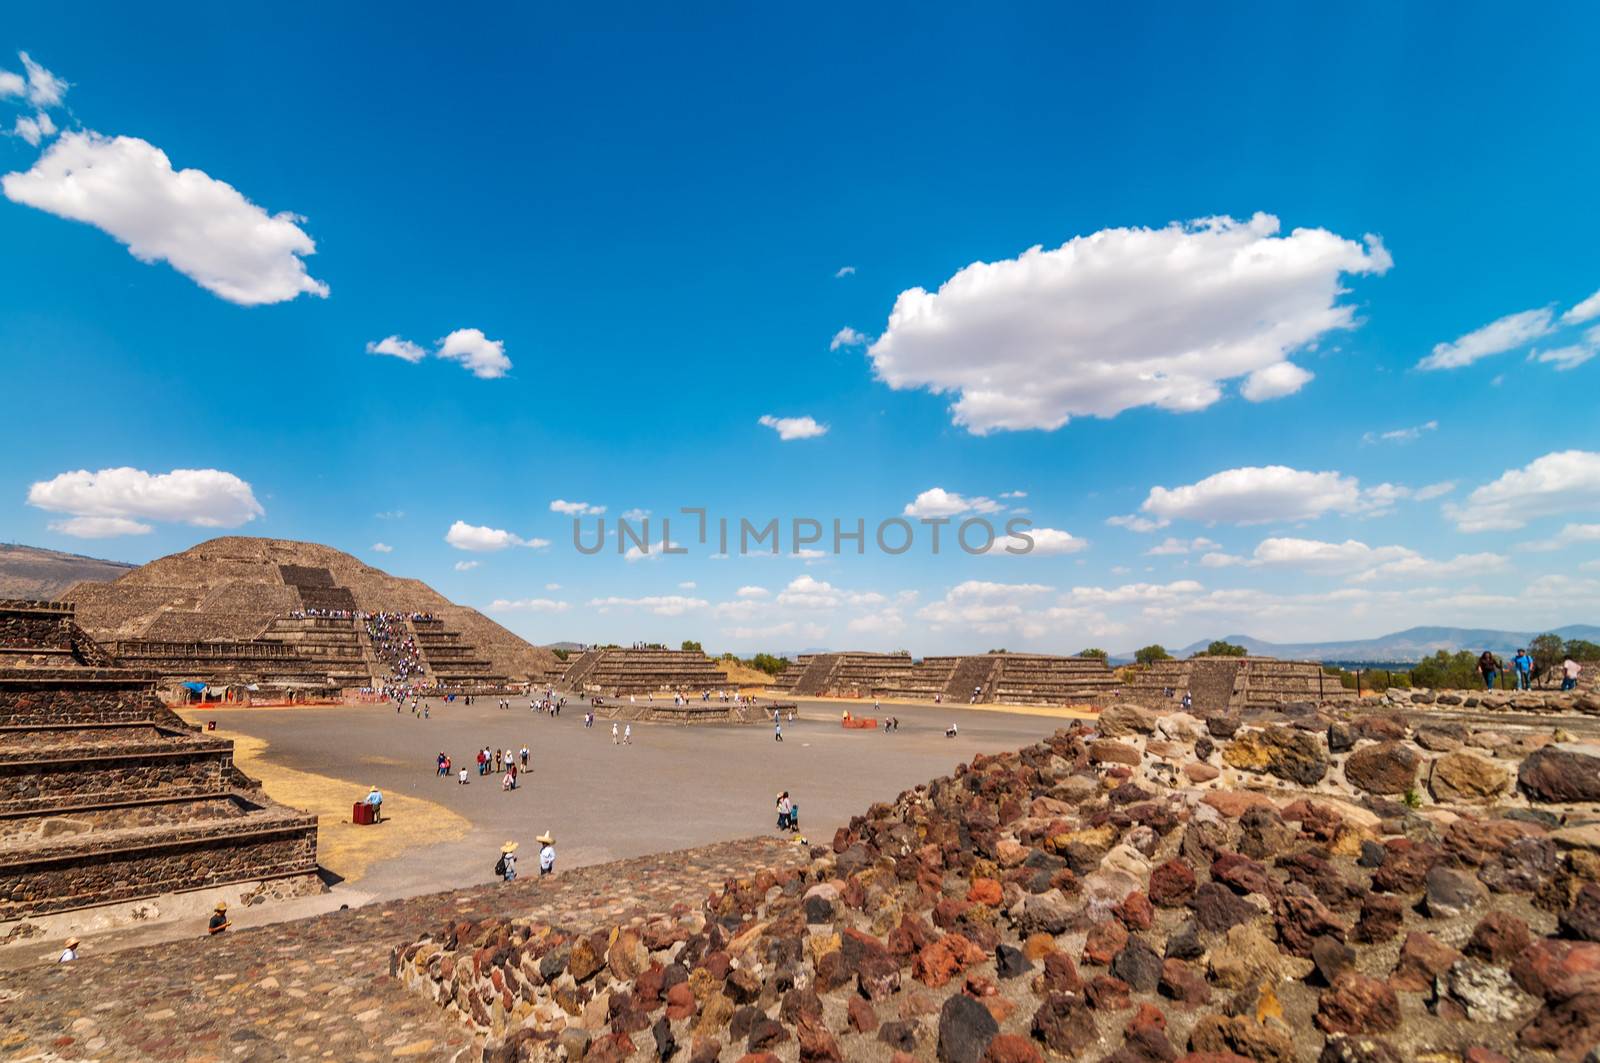 Plaza in from the of the Pyramid of the Moon in Teotihuacan near Mexico City